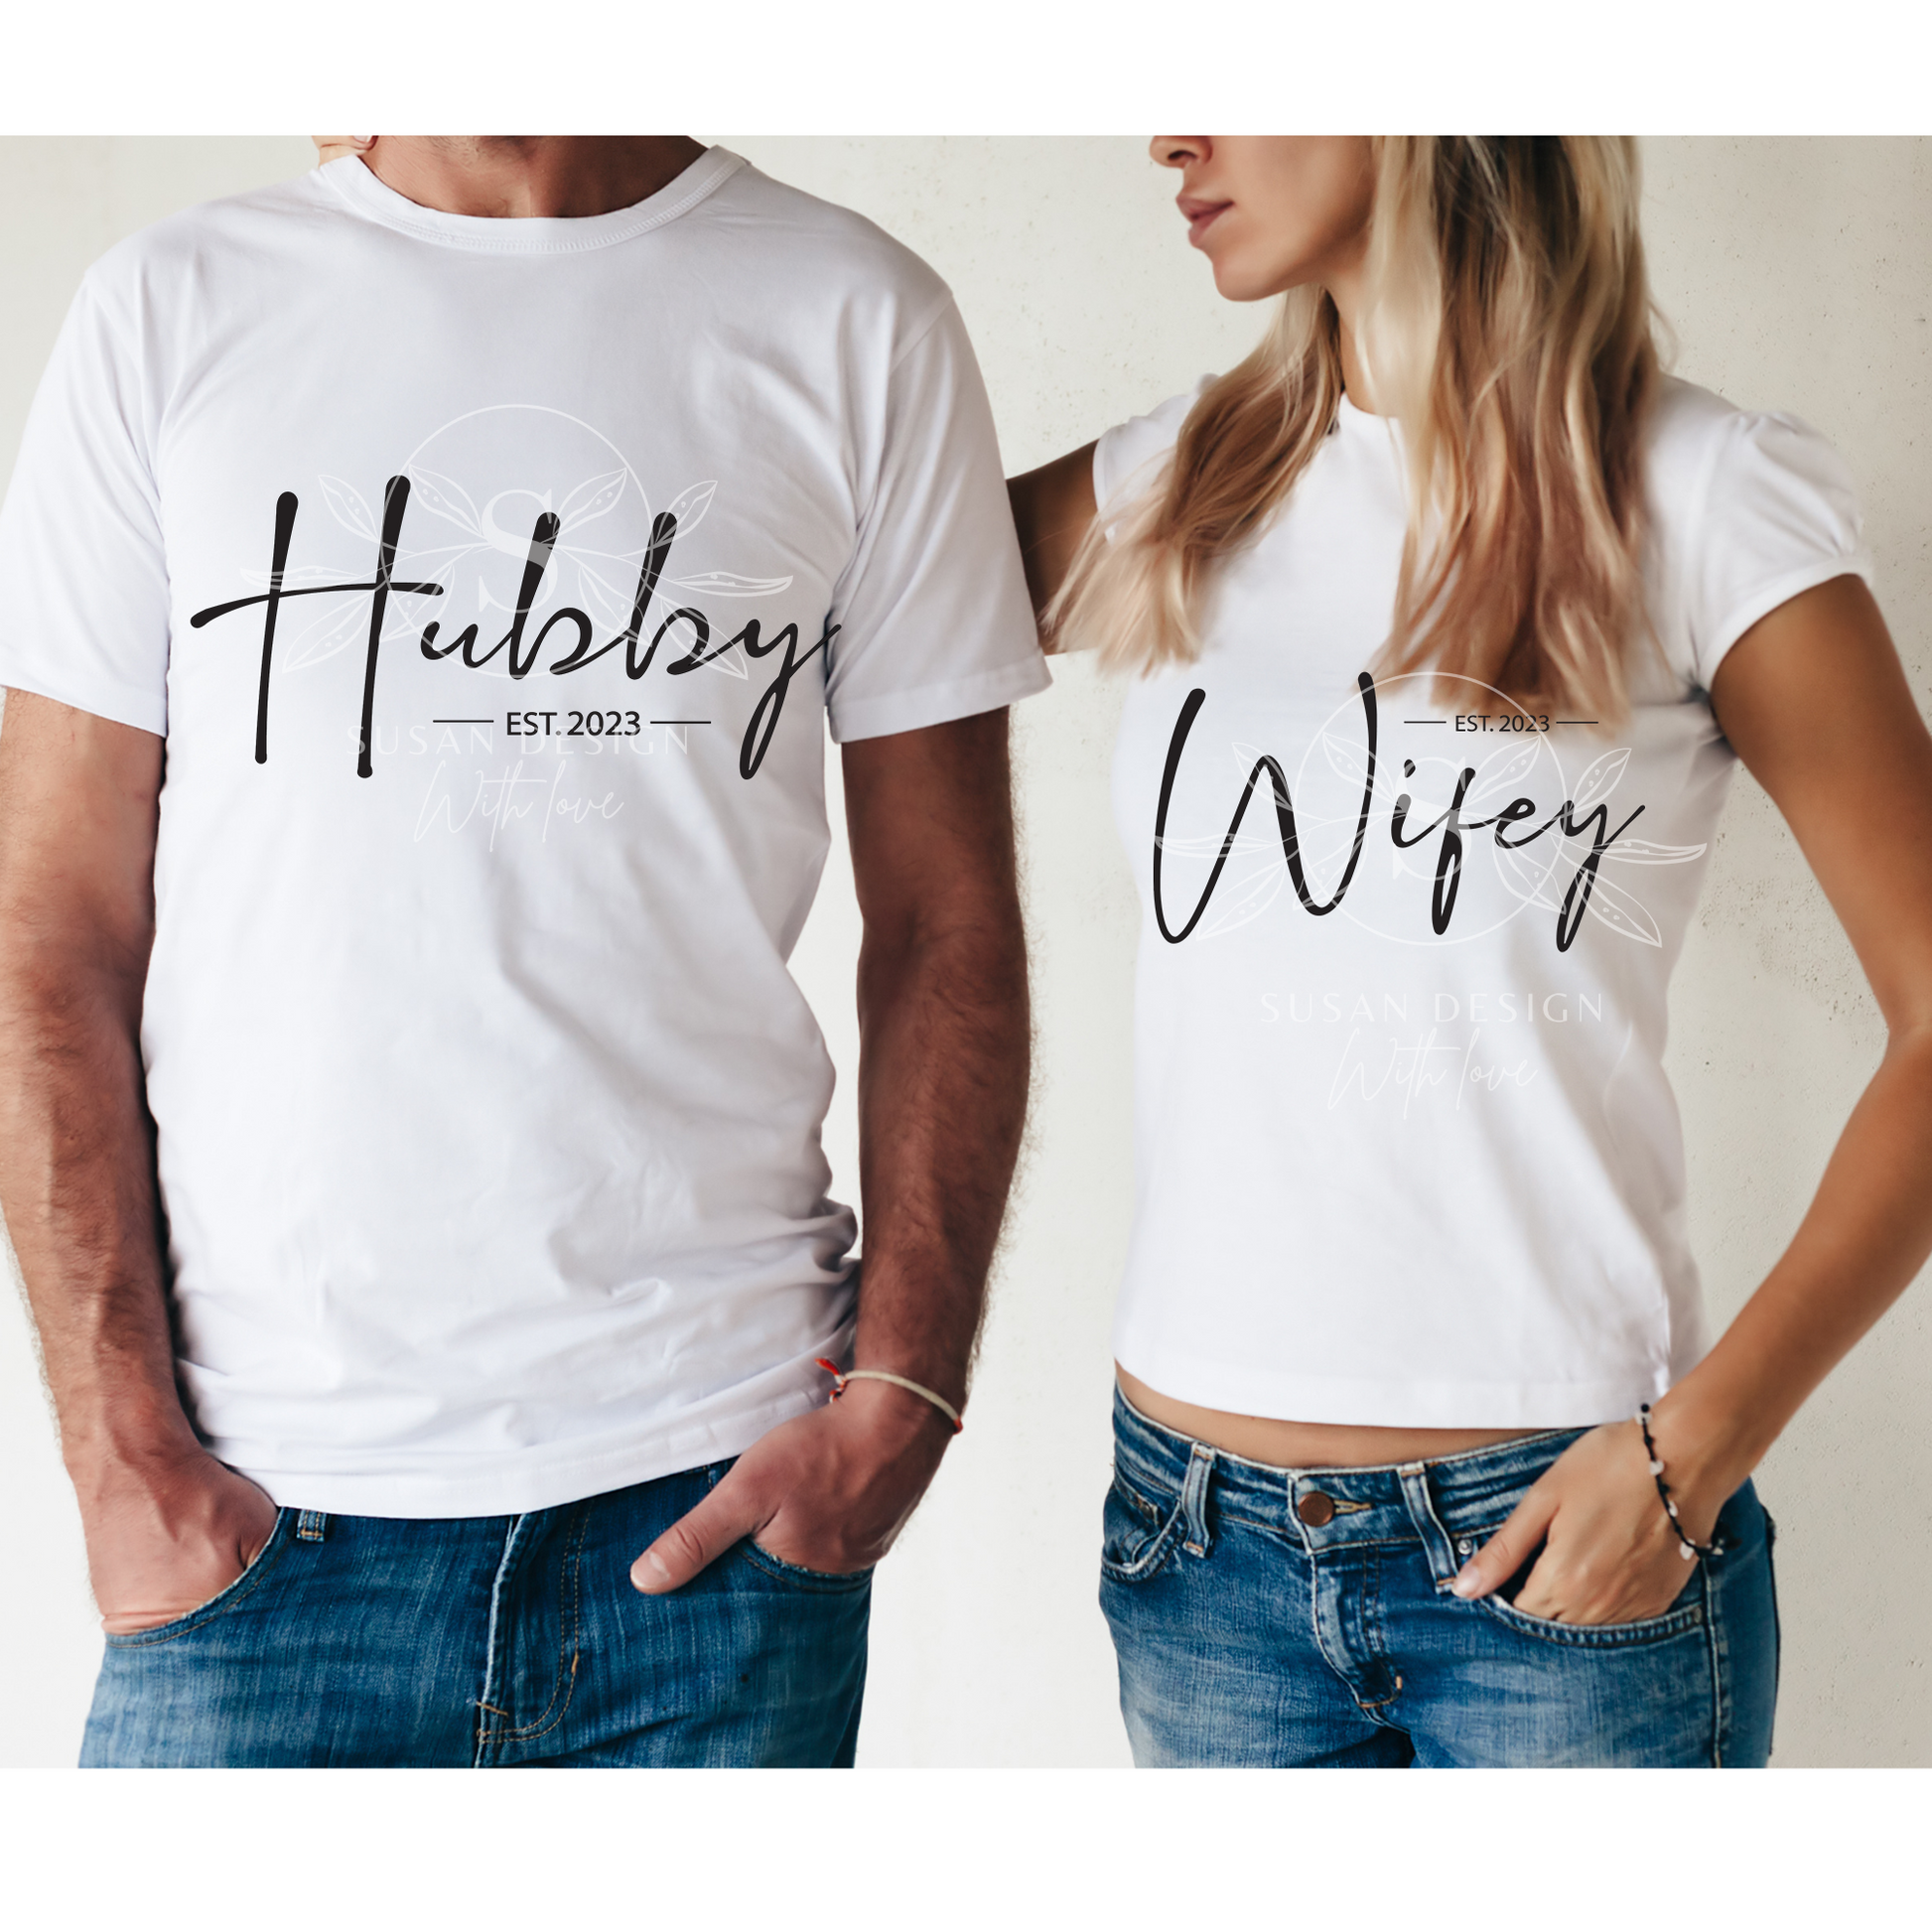 Hers and His SVG | Hers and His Arrows SVGs | Wife and Hubby svg | towel  hanger design svg | SVG files for Cricut